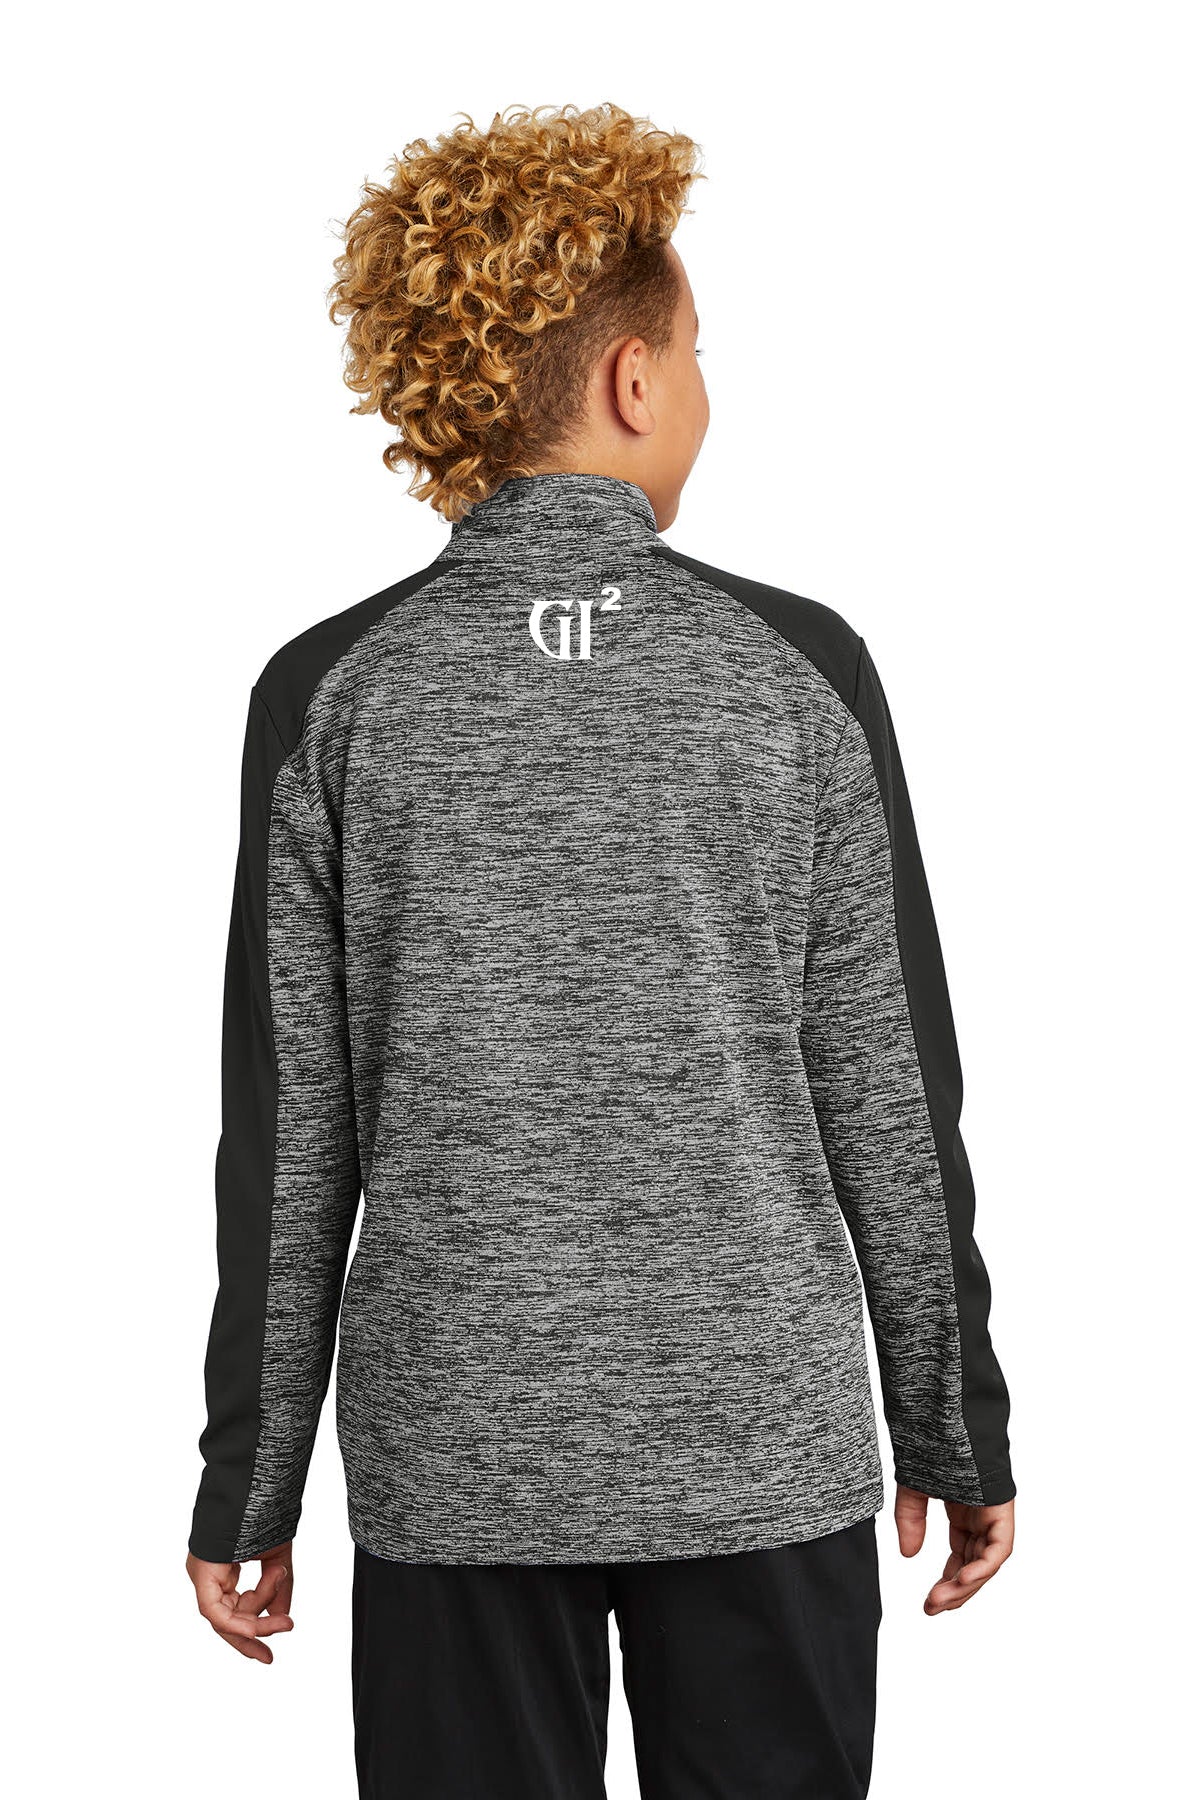 Youth 1/4 zip Heather Pullover - GET IT IN Apparel